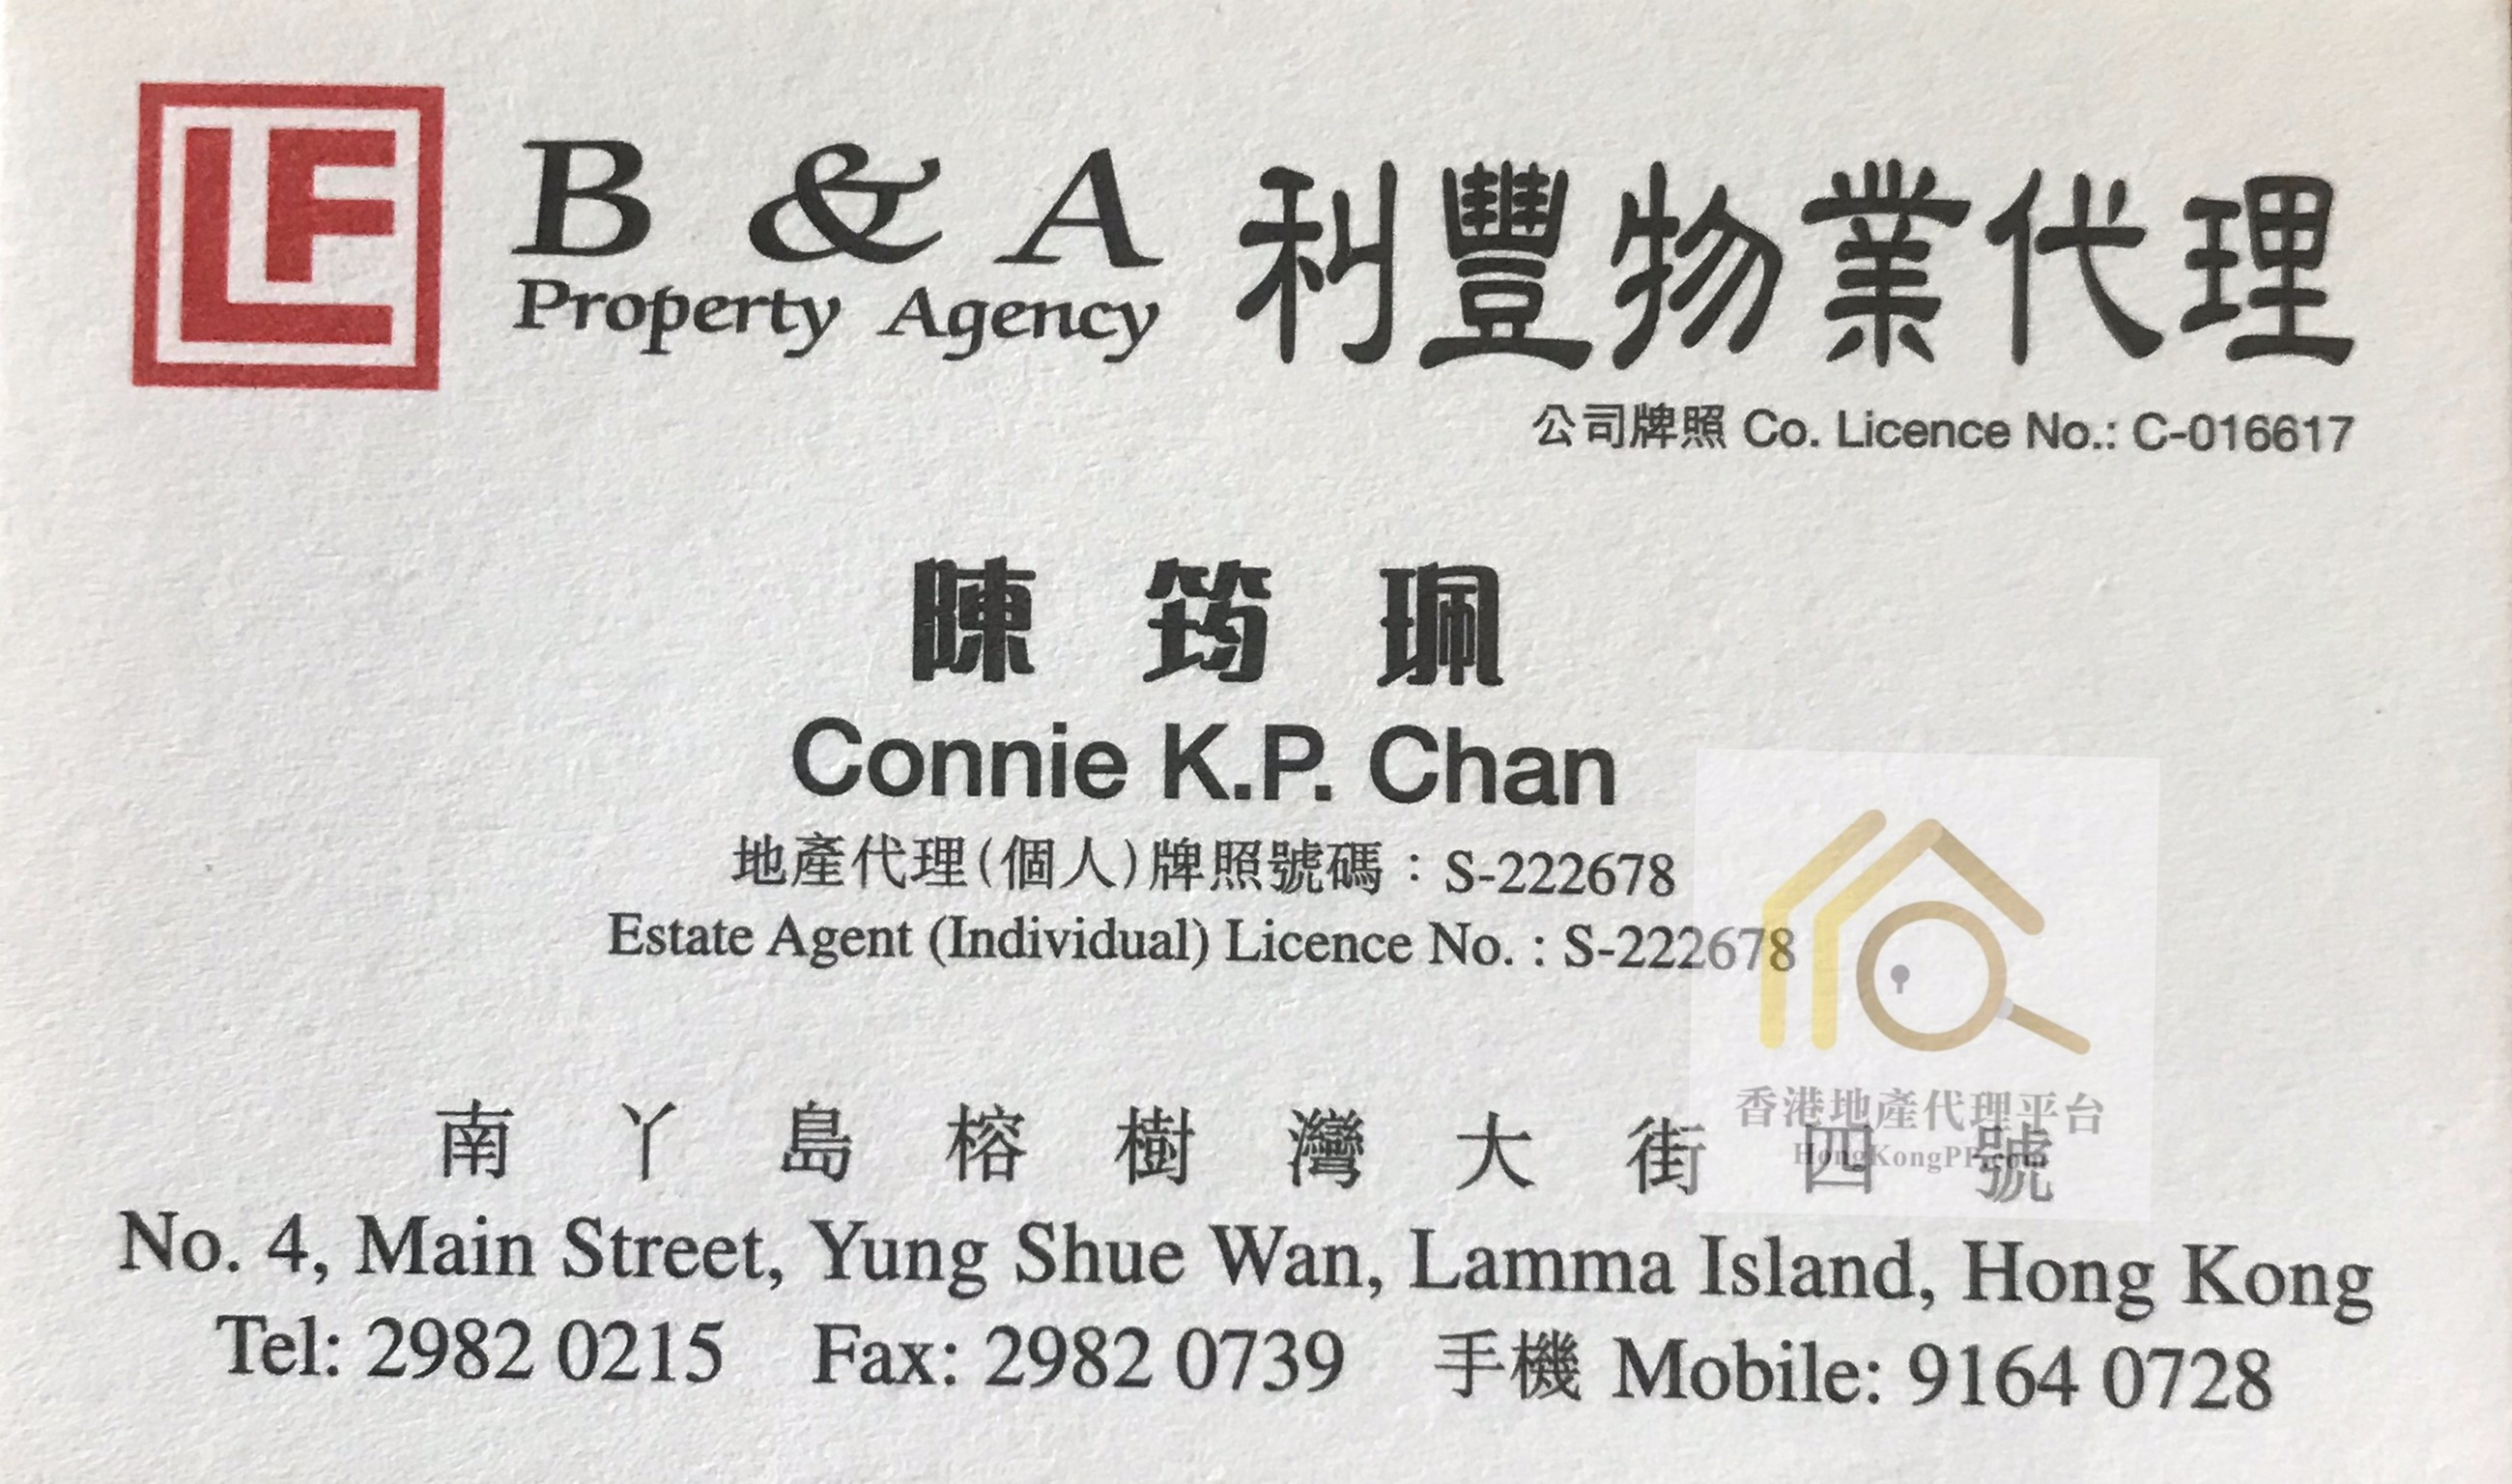 HousingEstate Agent: B & A Property Agency